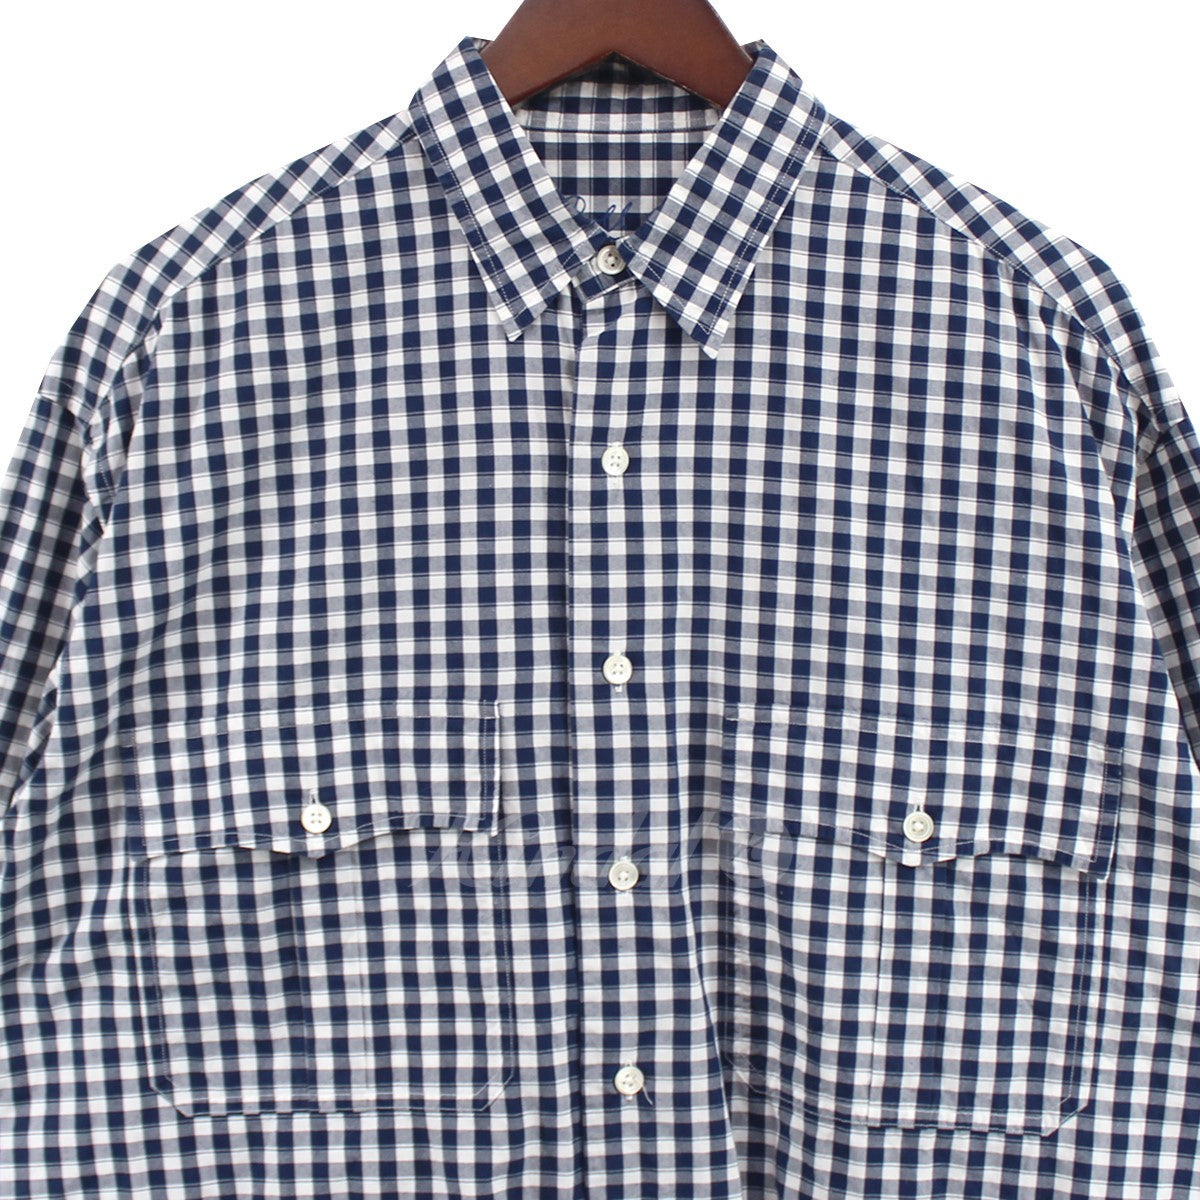 Porter Classic(ポータークラシック) ROLL UP GINGHAM CHECK SHIRT 